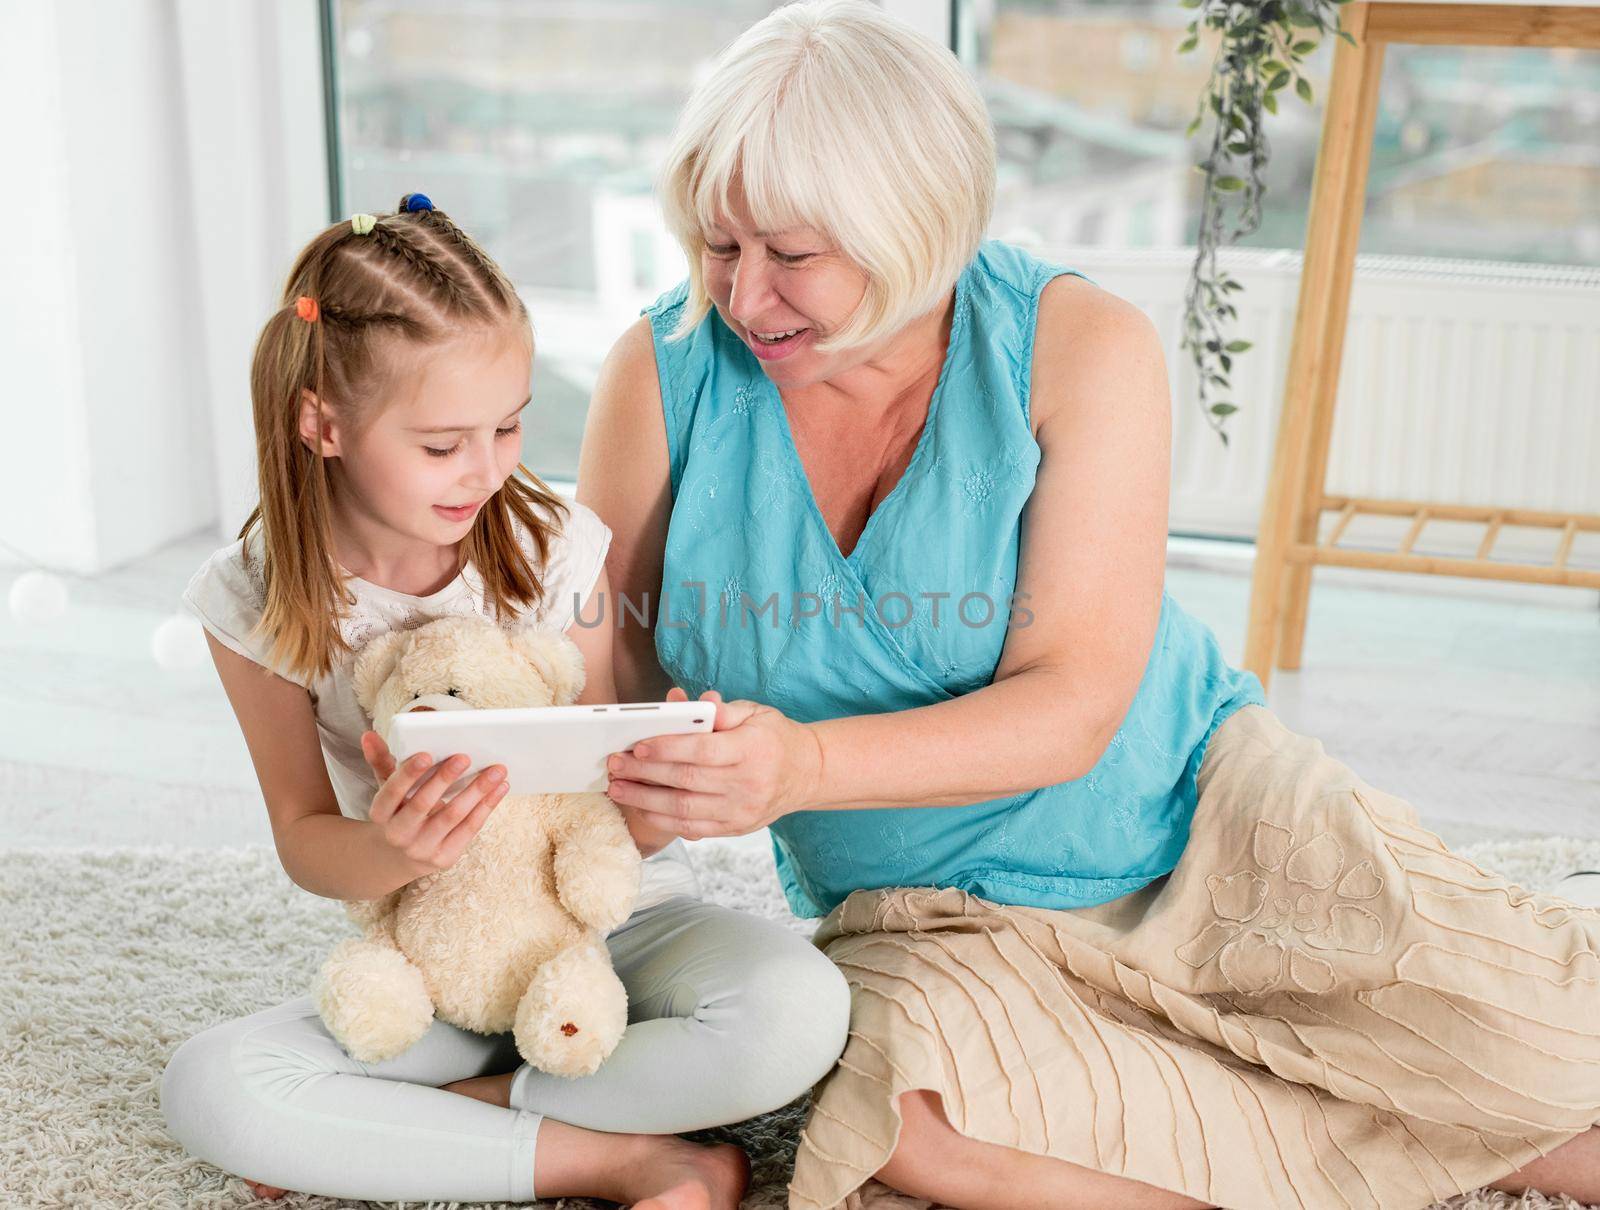 Happy grandmother with little granddaughter using tablet siting on floor in children's room